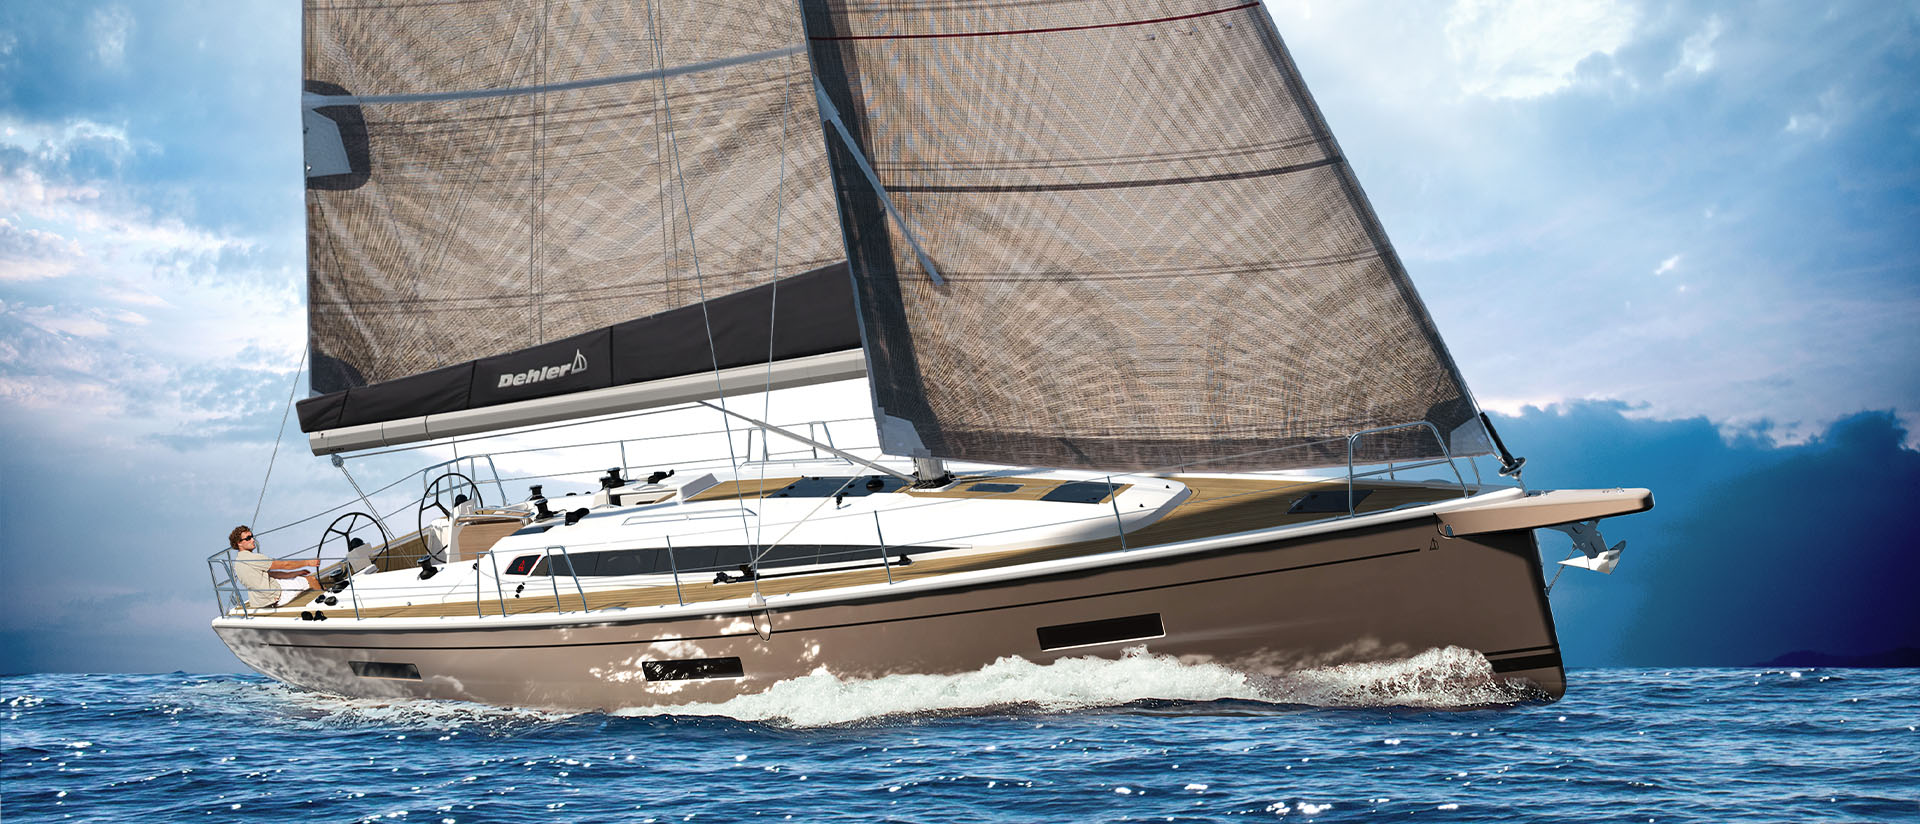 Dehler 46 SQ - Performance sailboat at sail on the open ocean